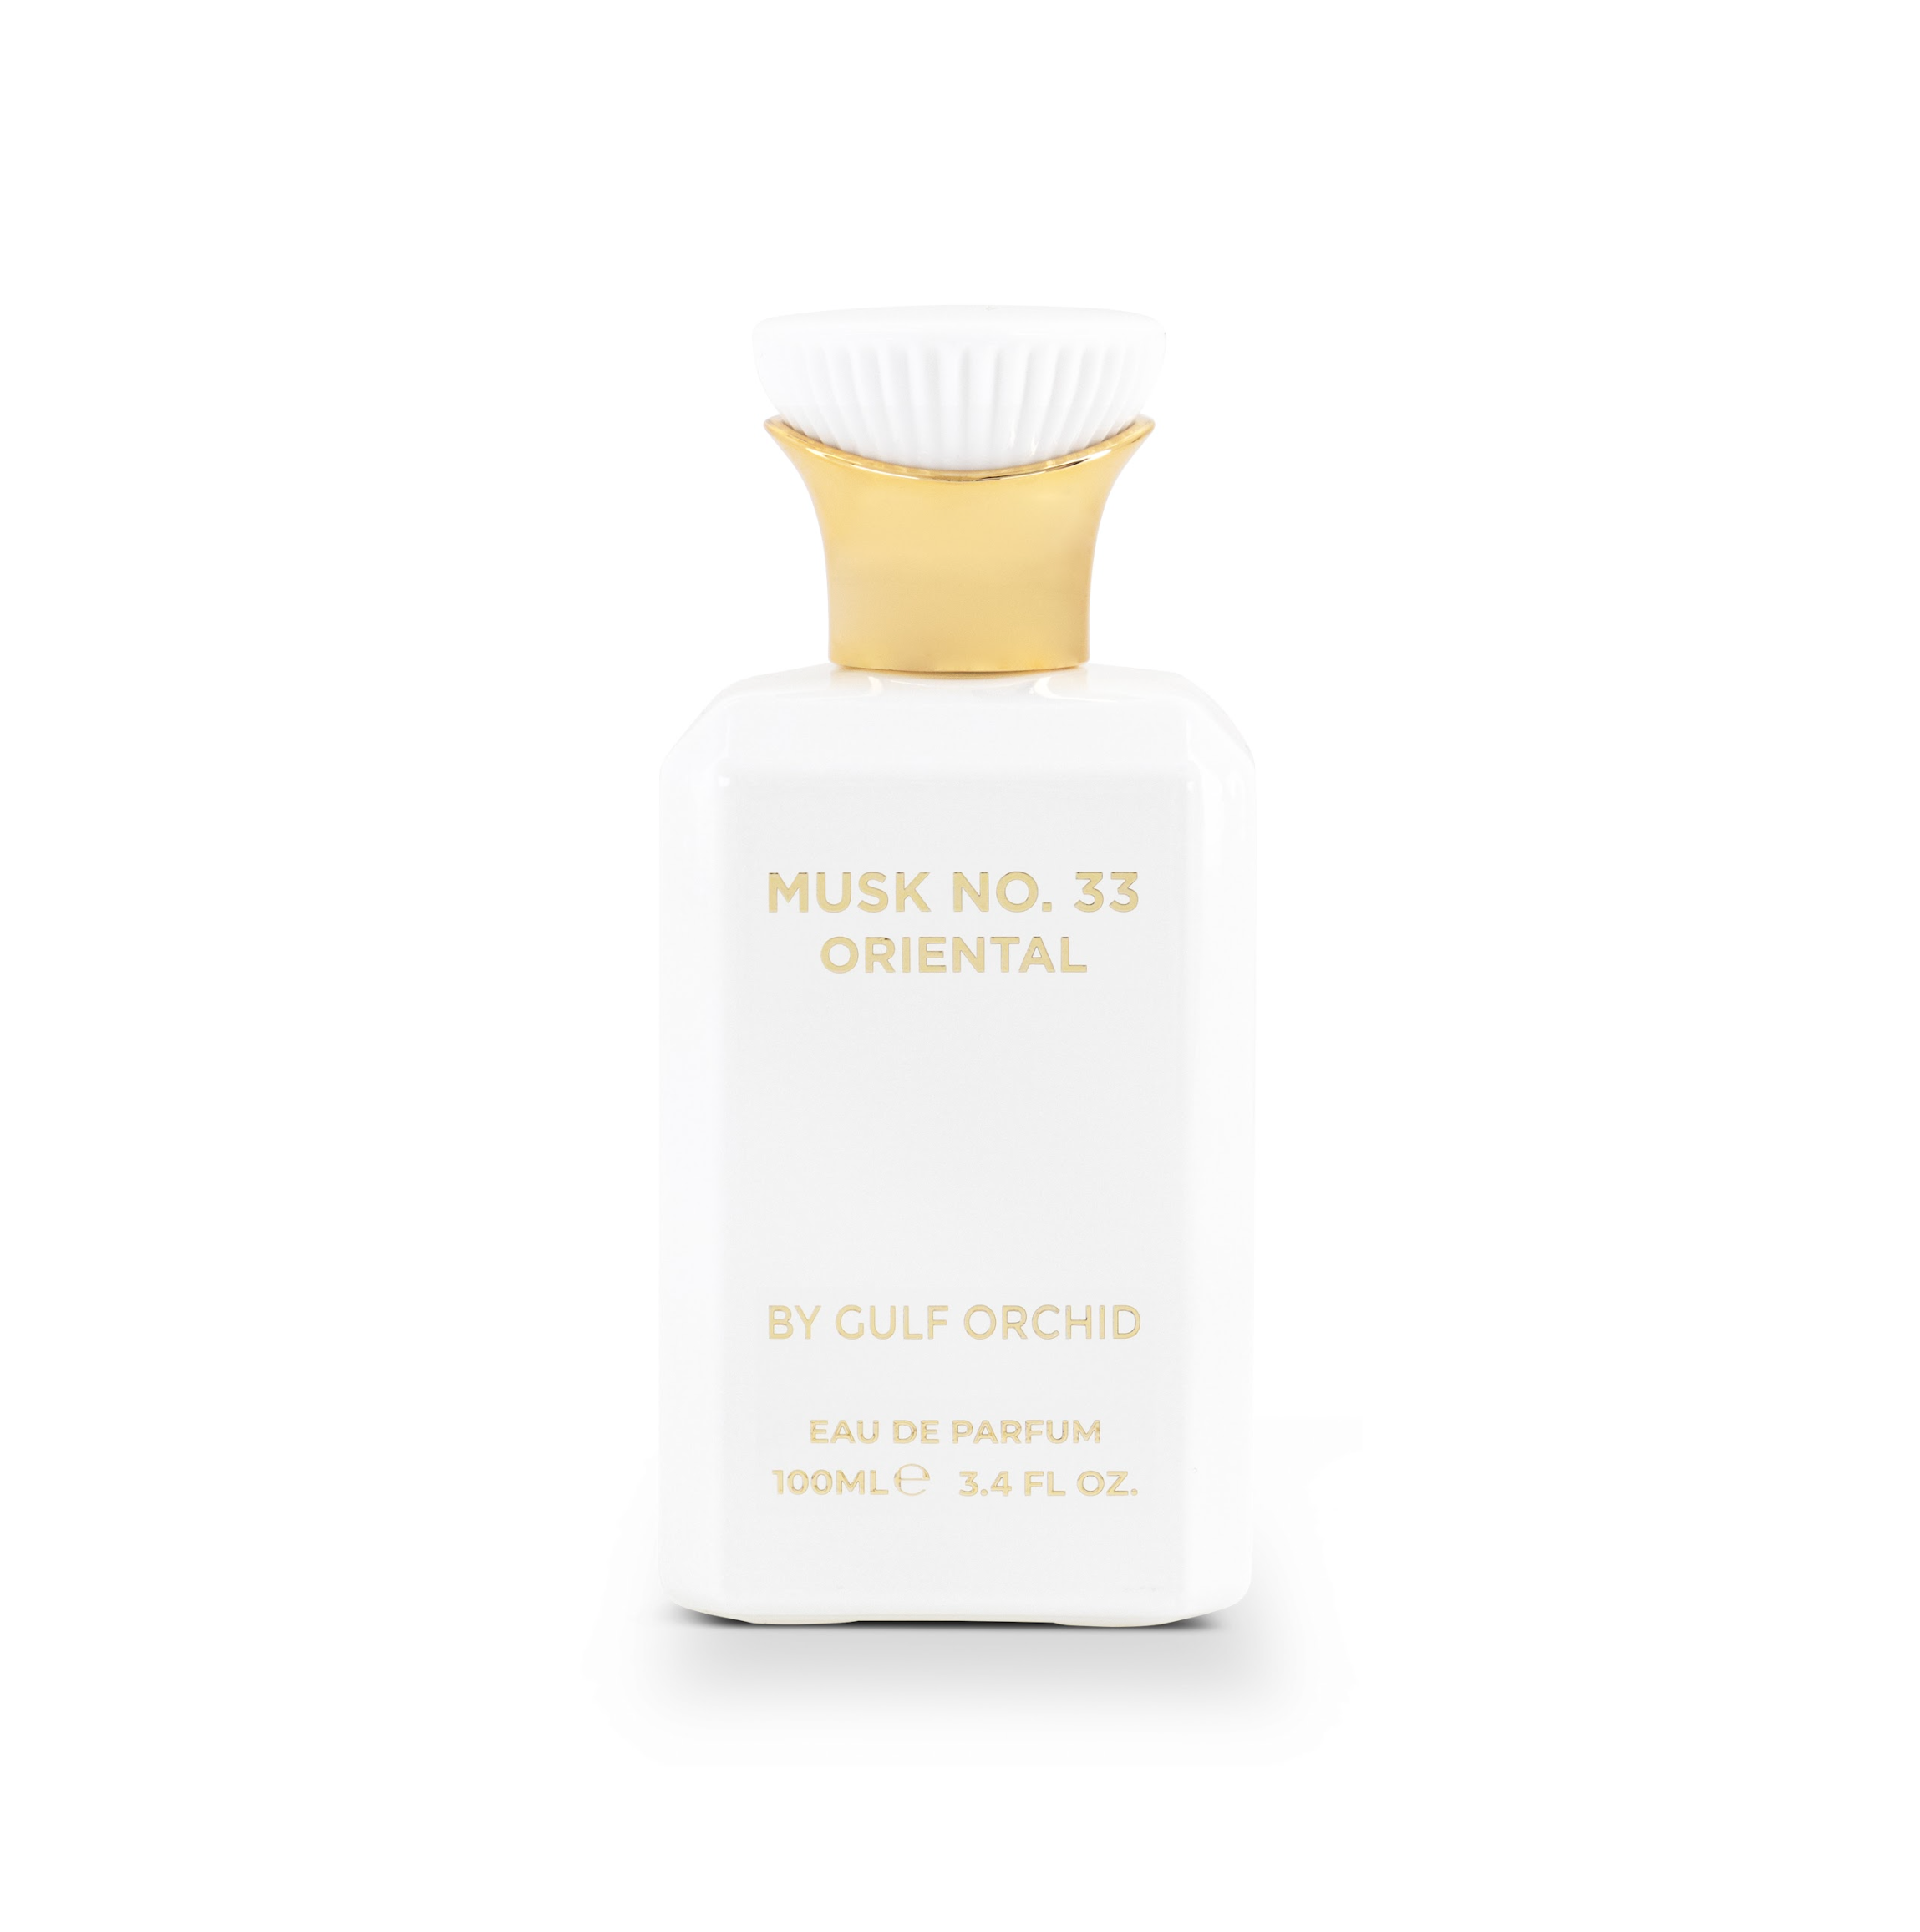 Musk No 33 EDP - 100Ml (3.4Oz) By Gulf Orchid